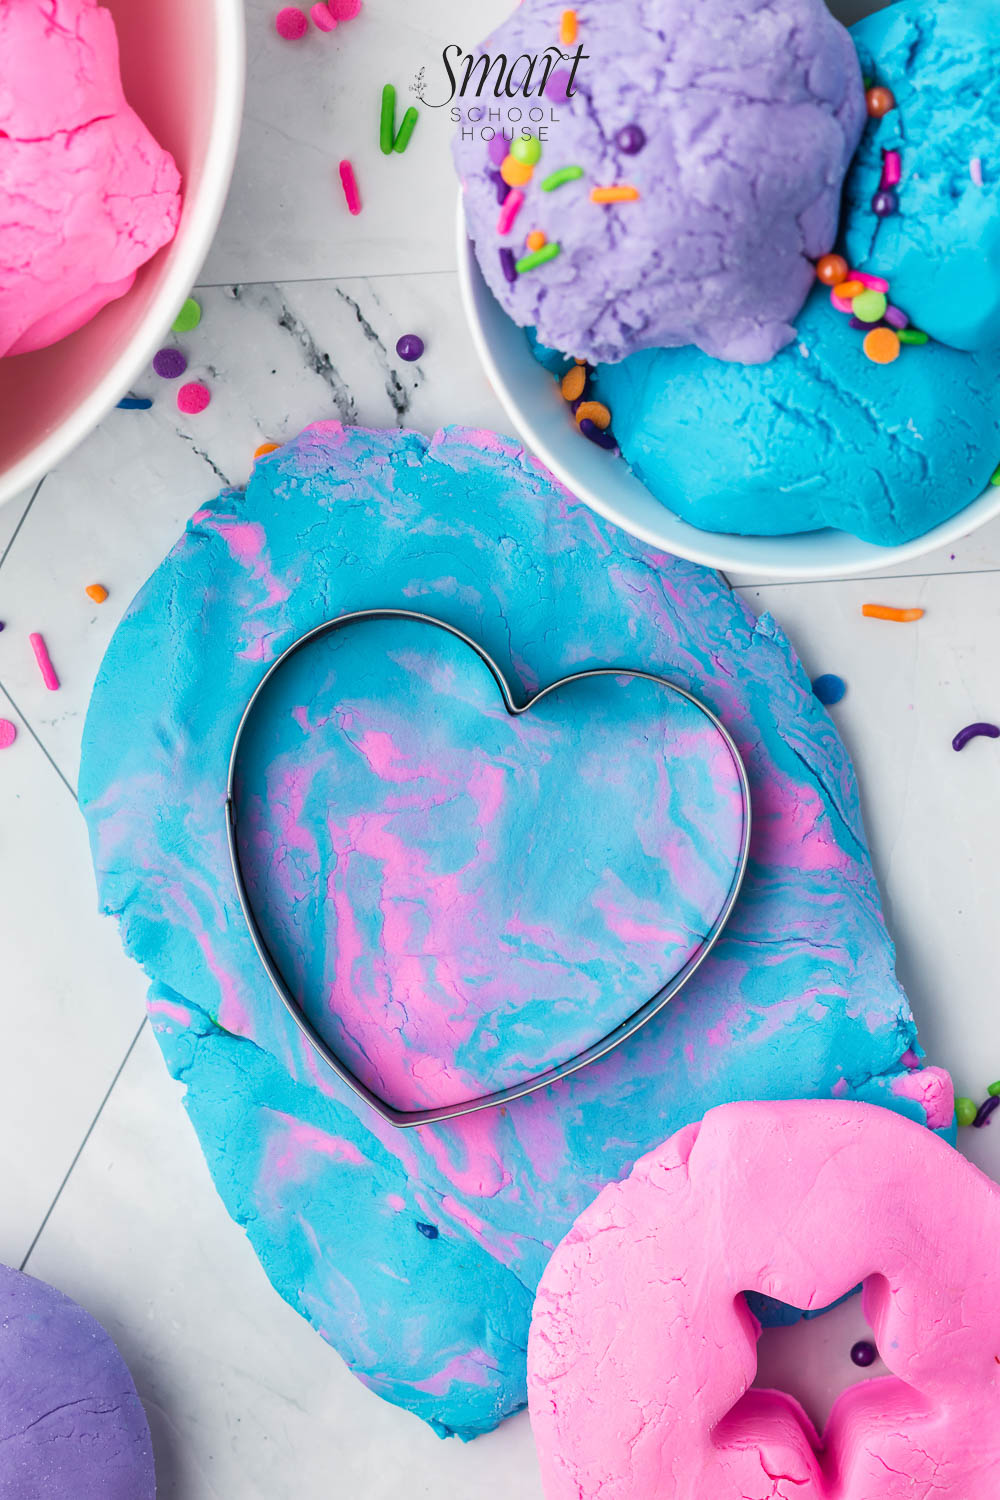 Play dough made with frosting